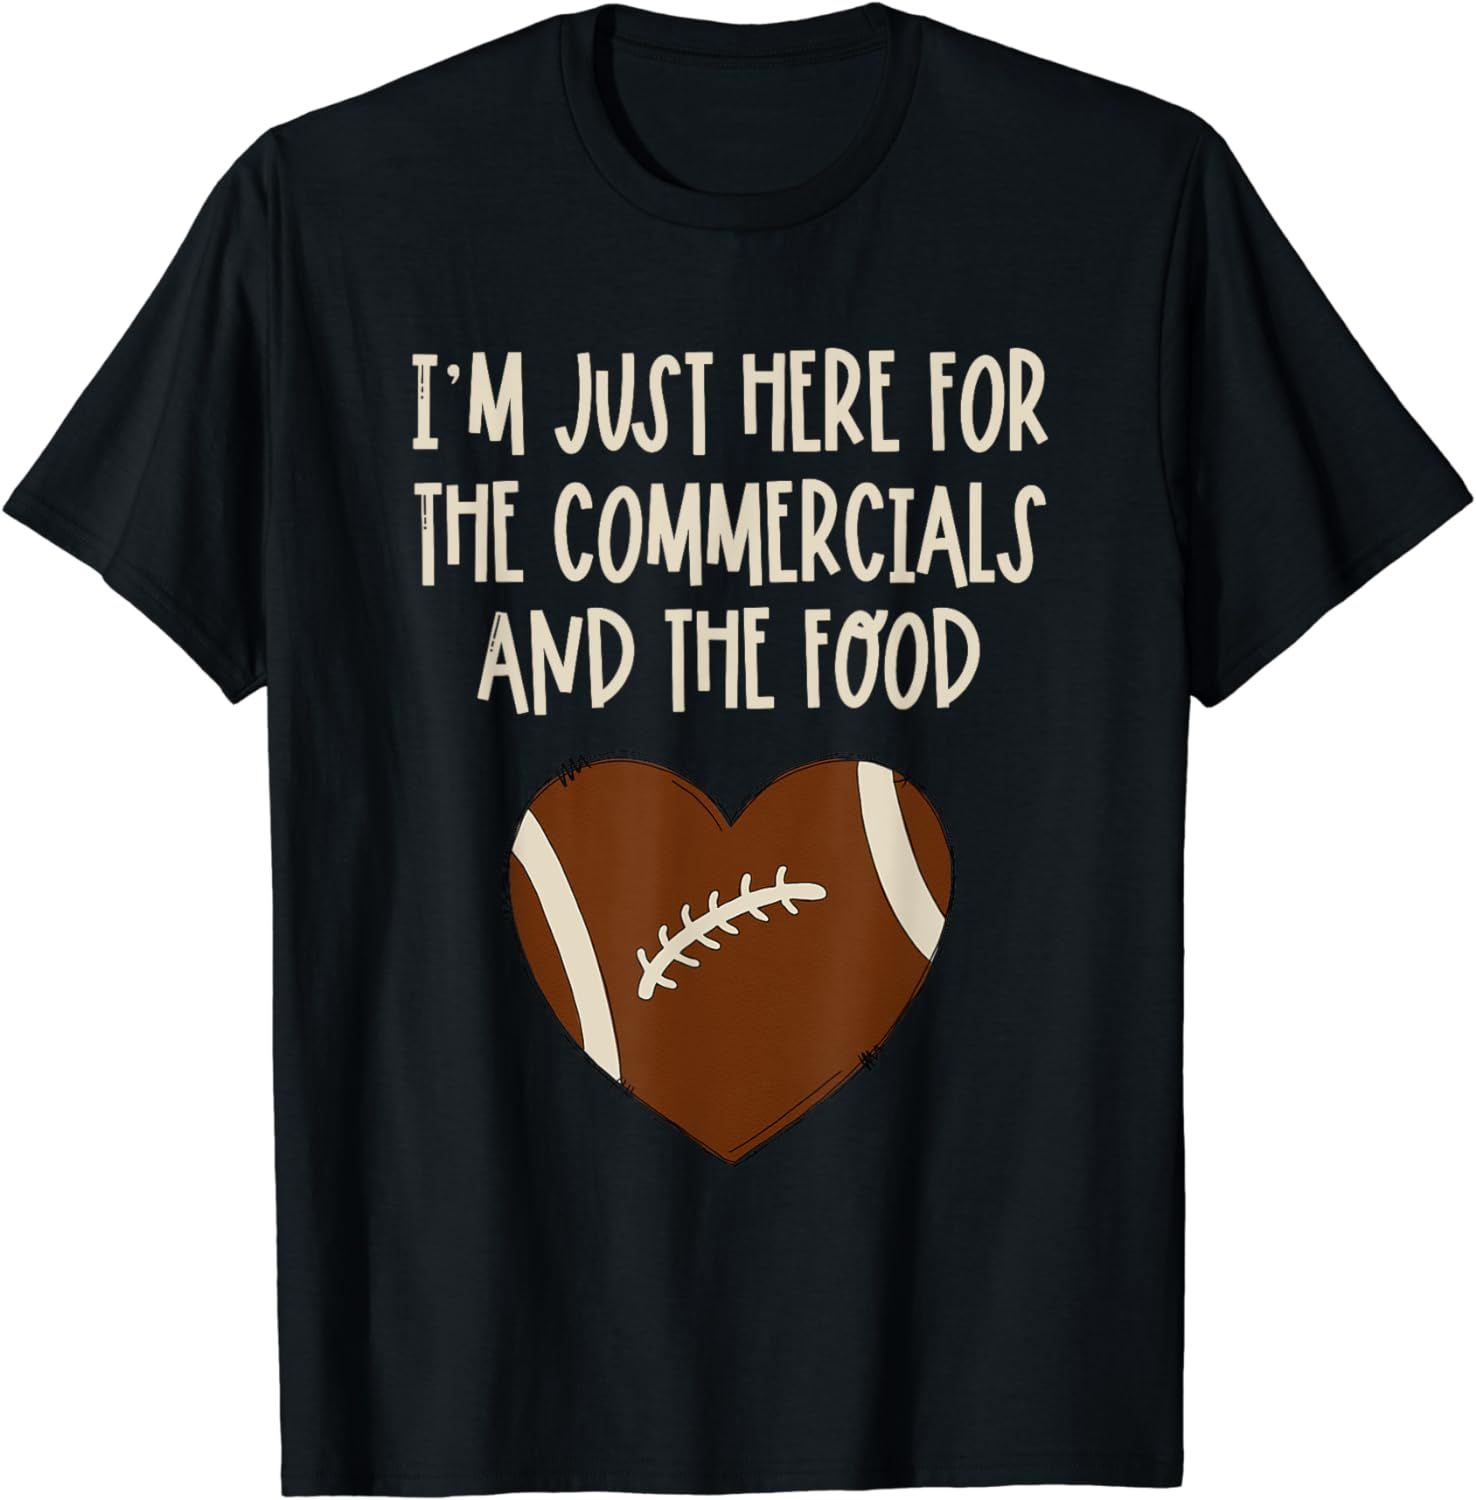 I'm Just Here For The Commercials And Food Girls Football T-Shirt | Amazon (US)